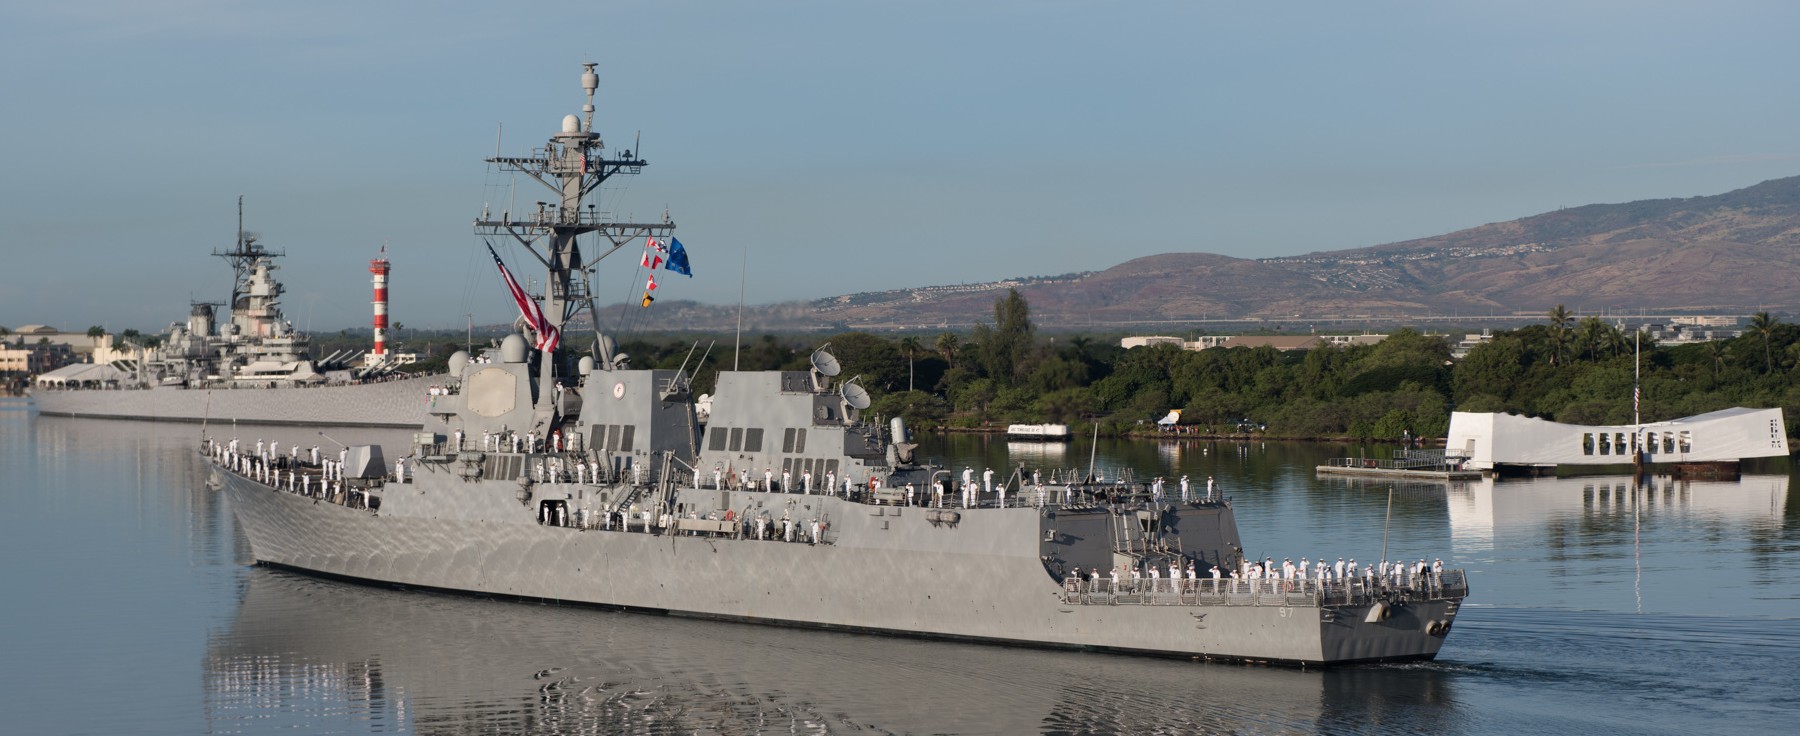 ddg-97 uss halsey arleigh burke class guided missile destroyer pearl harbor remembrance day 47